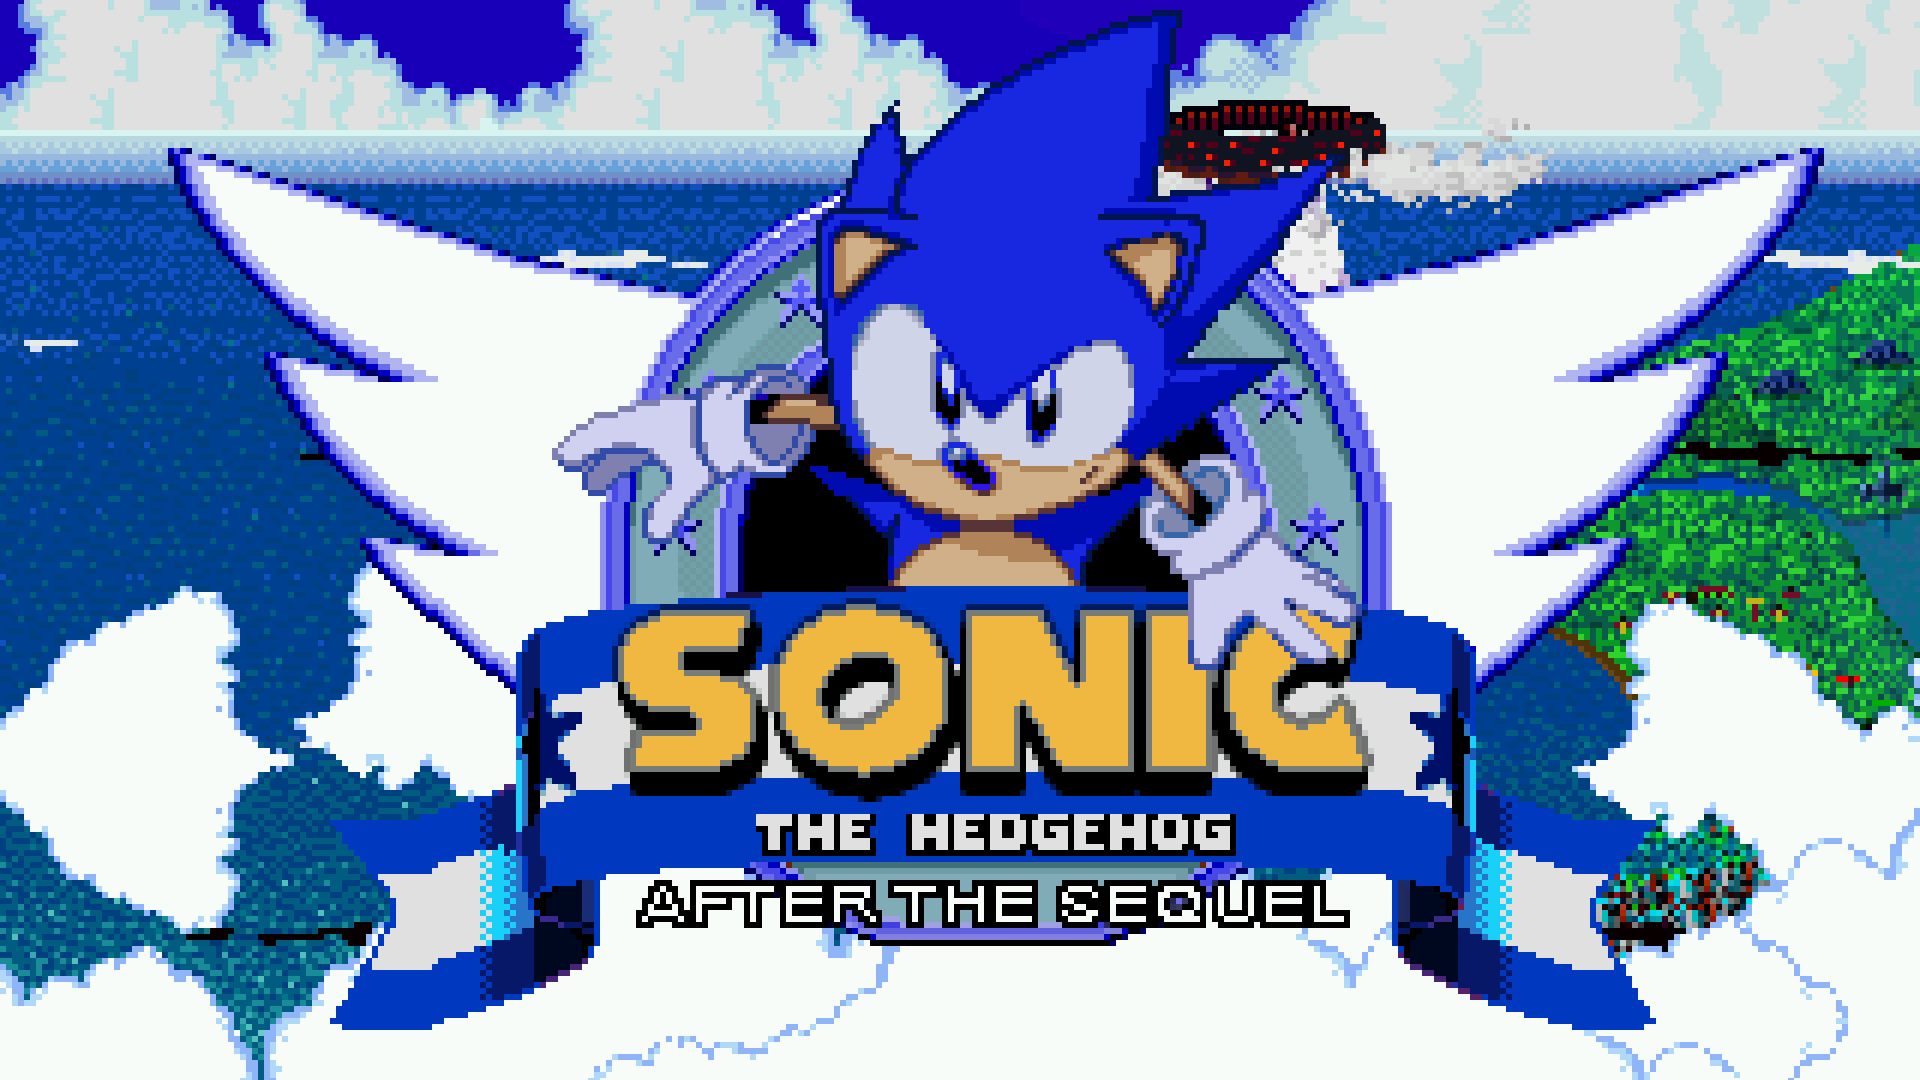 Sonic: After the Sequel Logo